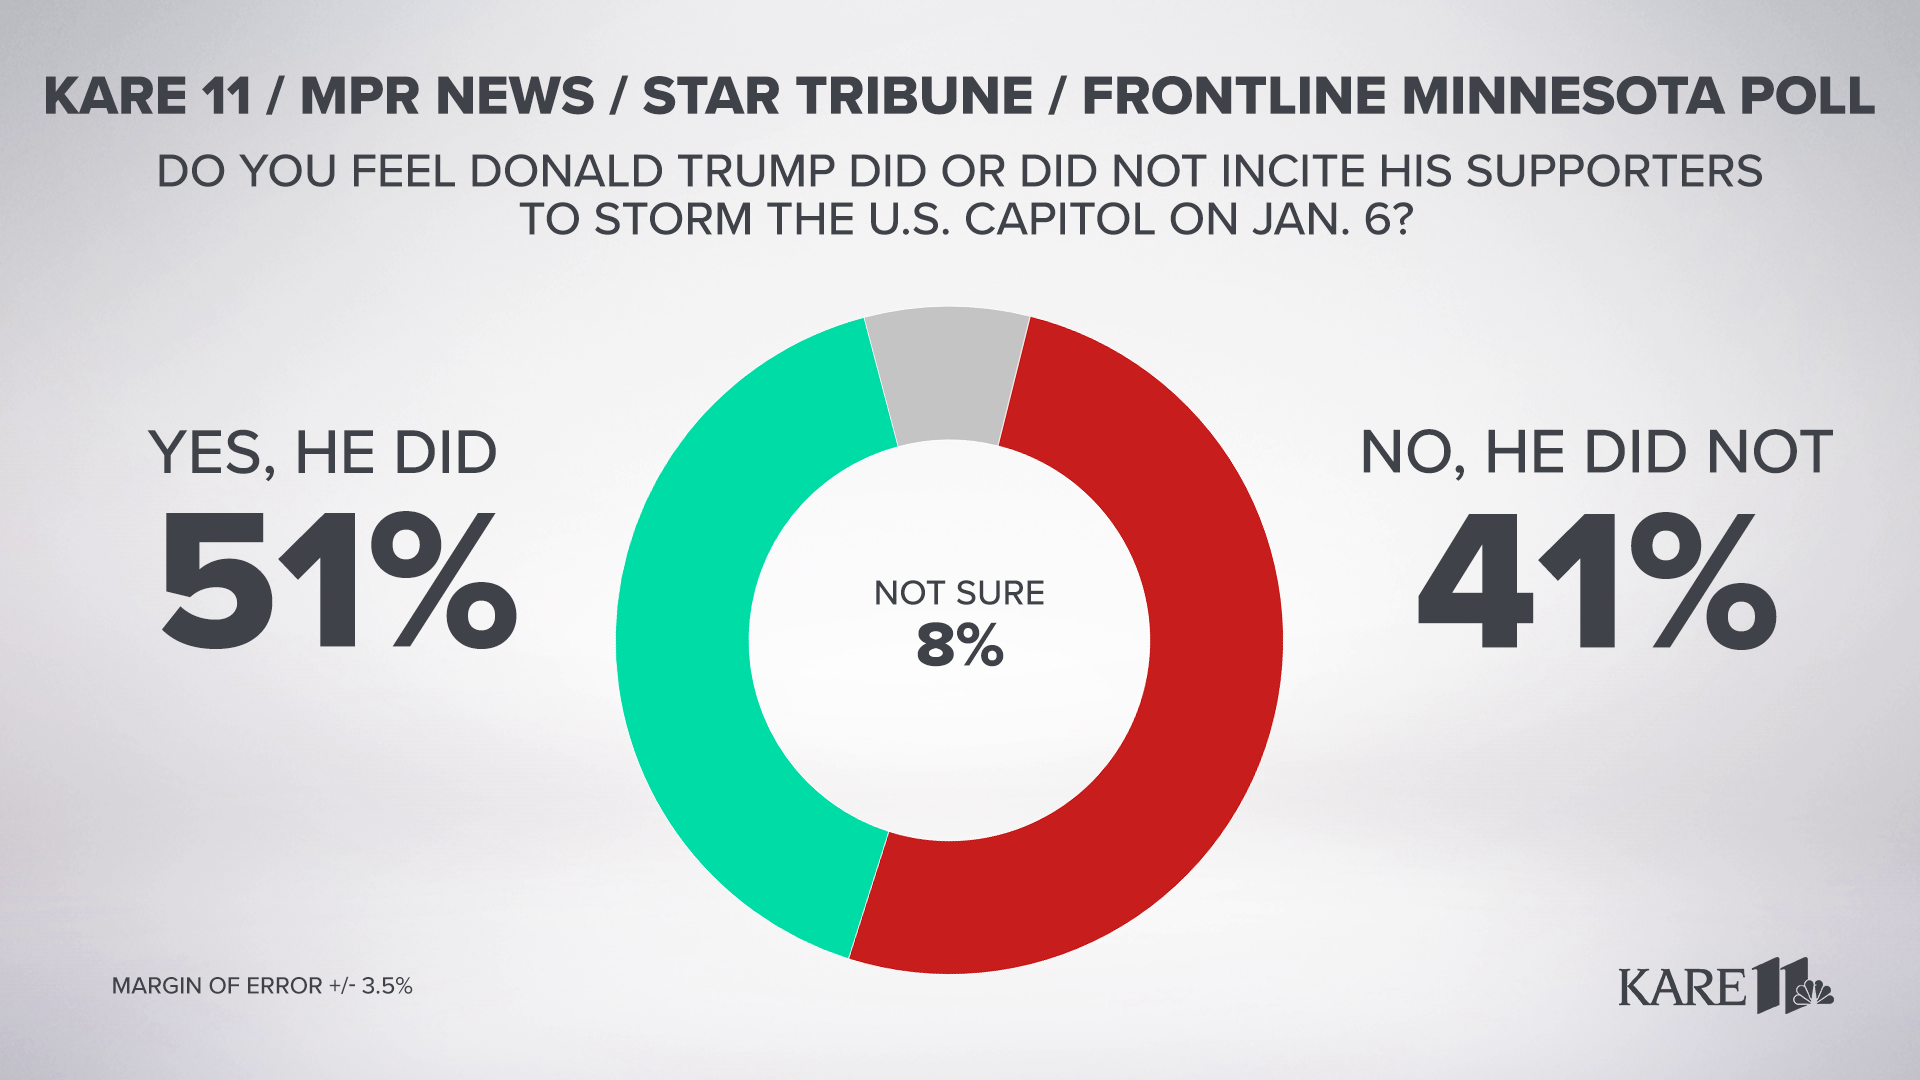 In a KARE 11/MPR News/Star Tribune/FRONTLINE Minnesota Poll, 51% of voters said Trump incited his supporters to storm the U.S. Capitol, 41% disagreed.